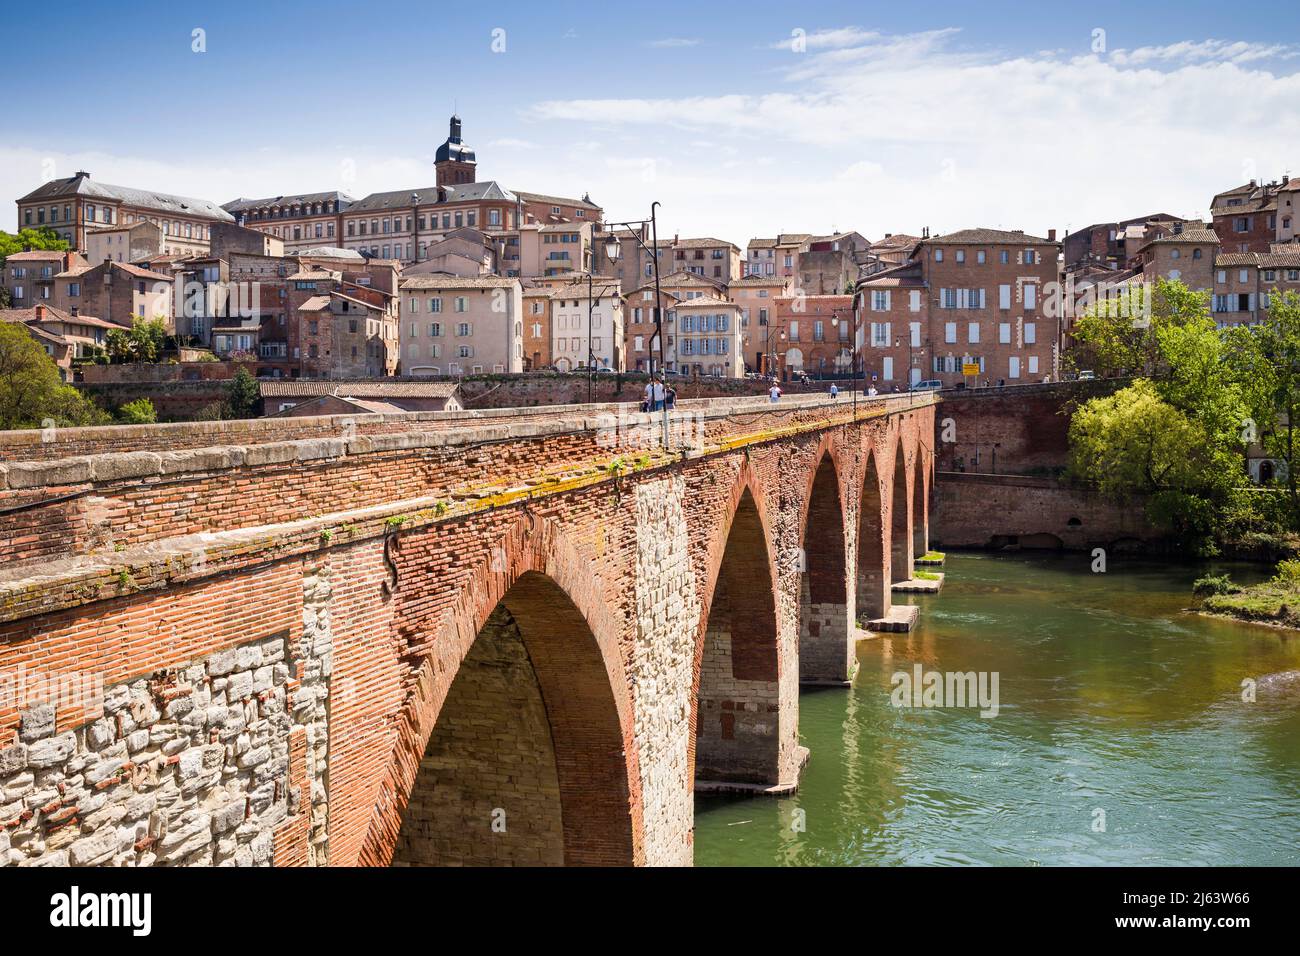 The Medieval Historic Town Centre of Albi, Occitanie, France, a UNESCO World Heritage Site, on the River Tarn. Stock Photo